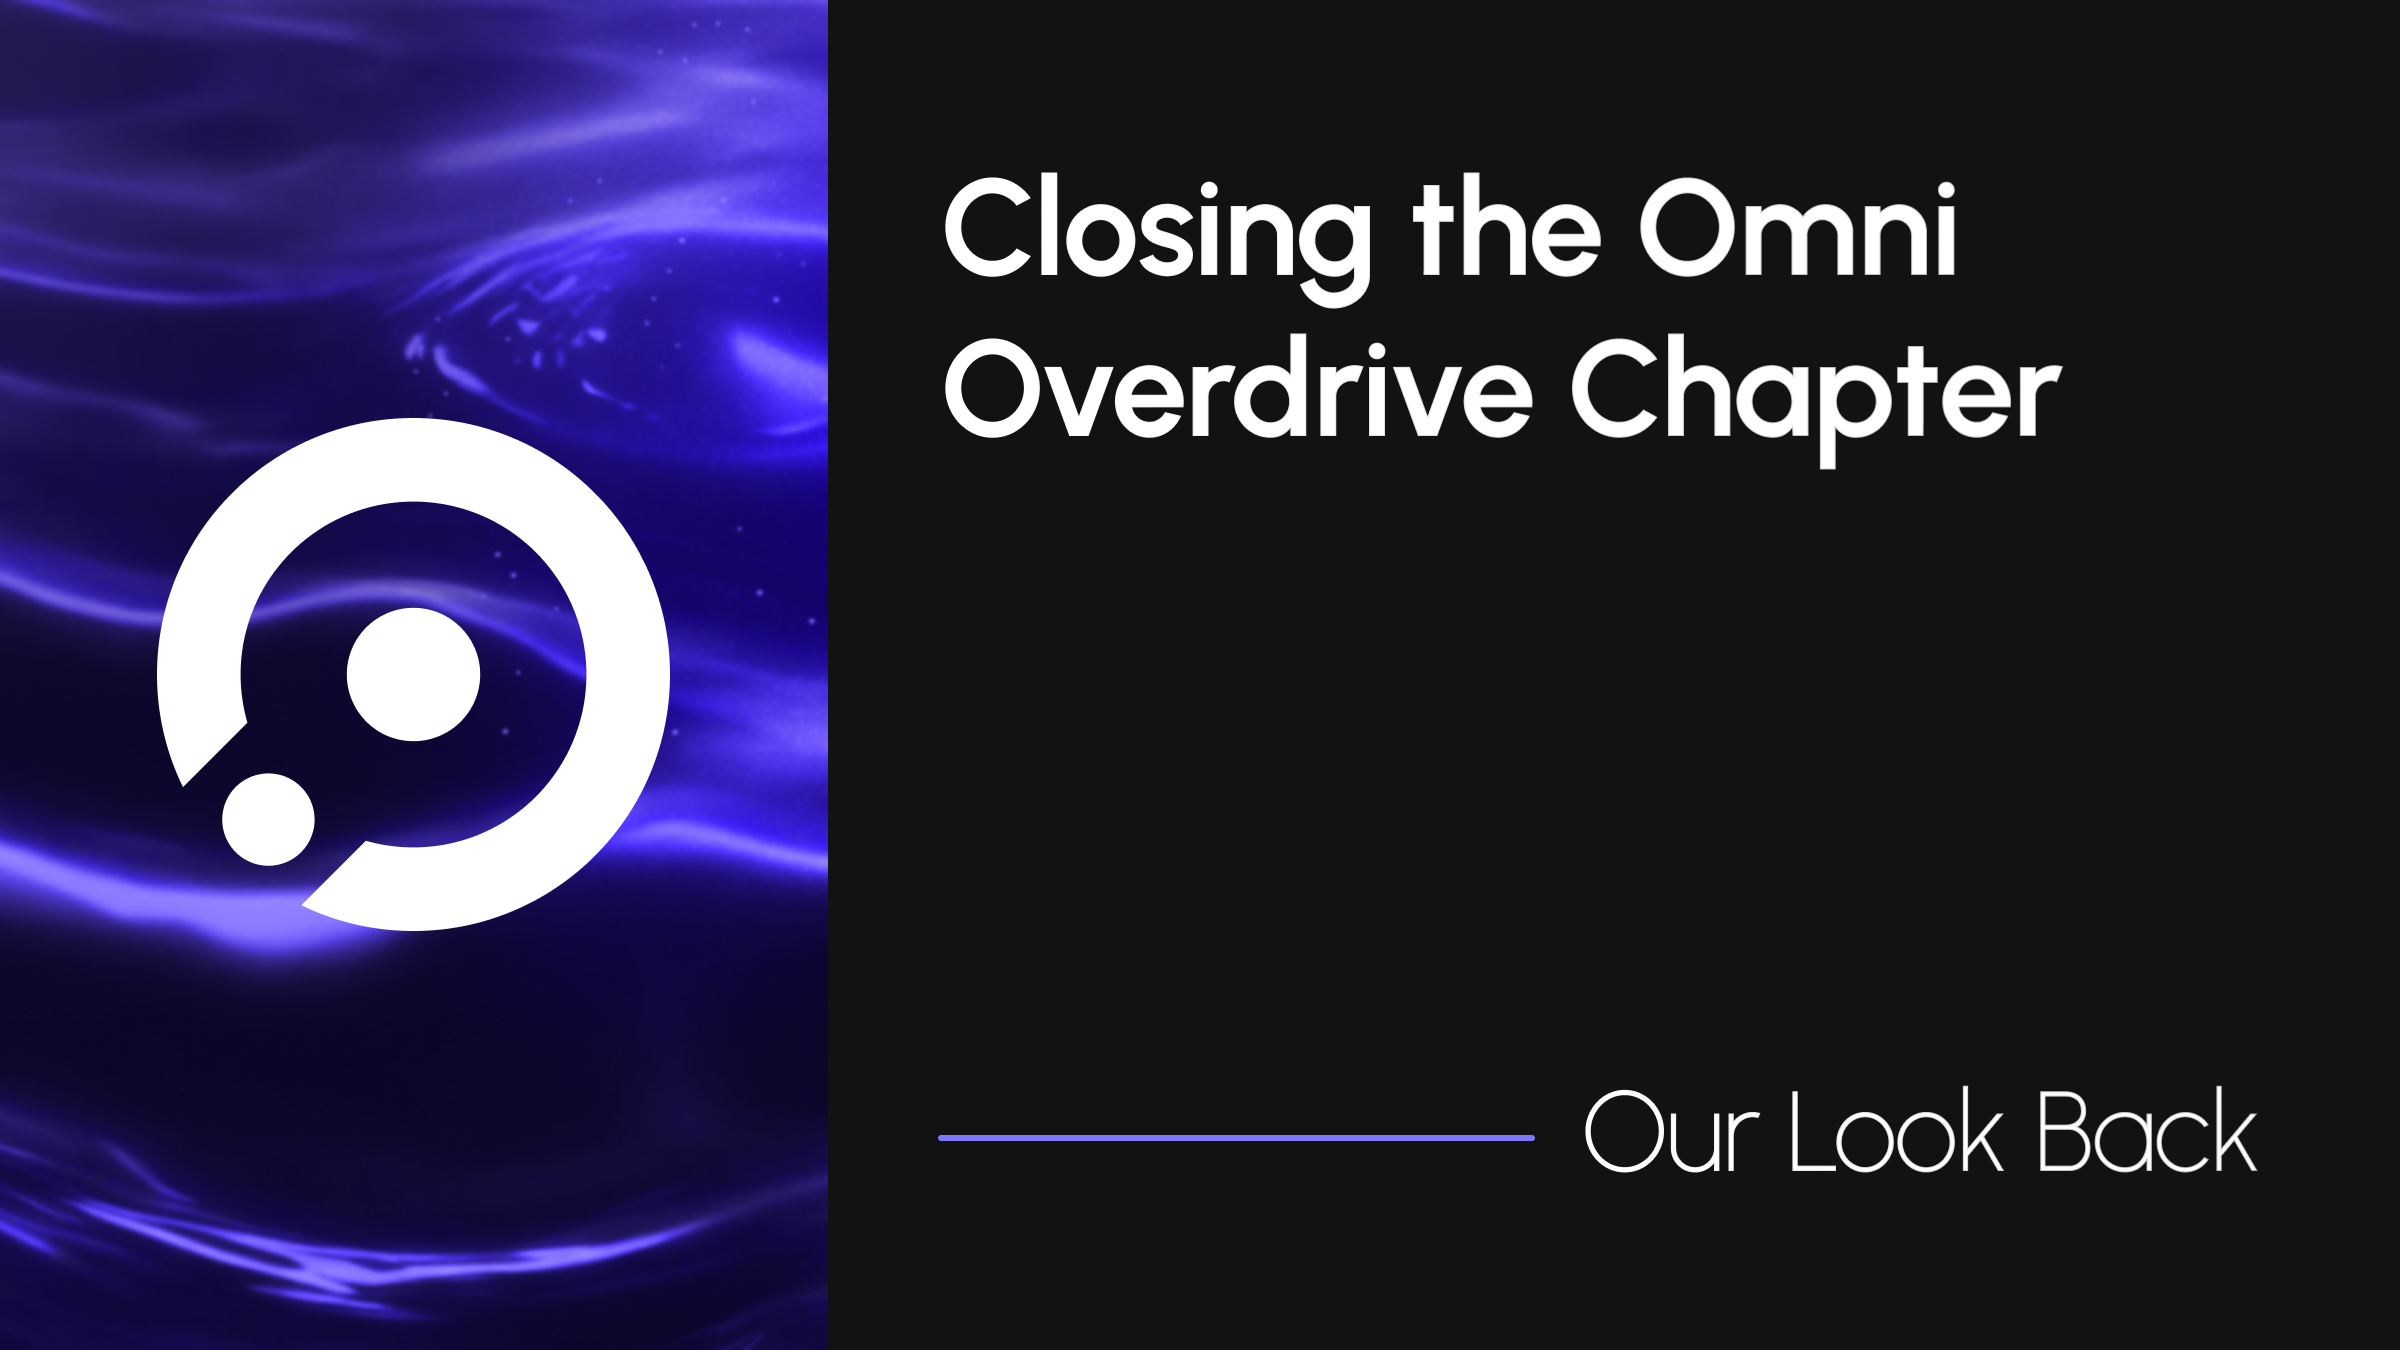 Omni Overdrive: Sign-Off and the Path Ahead